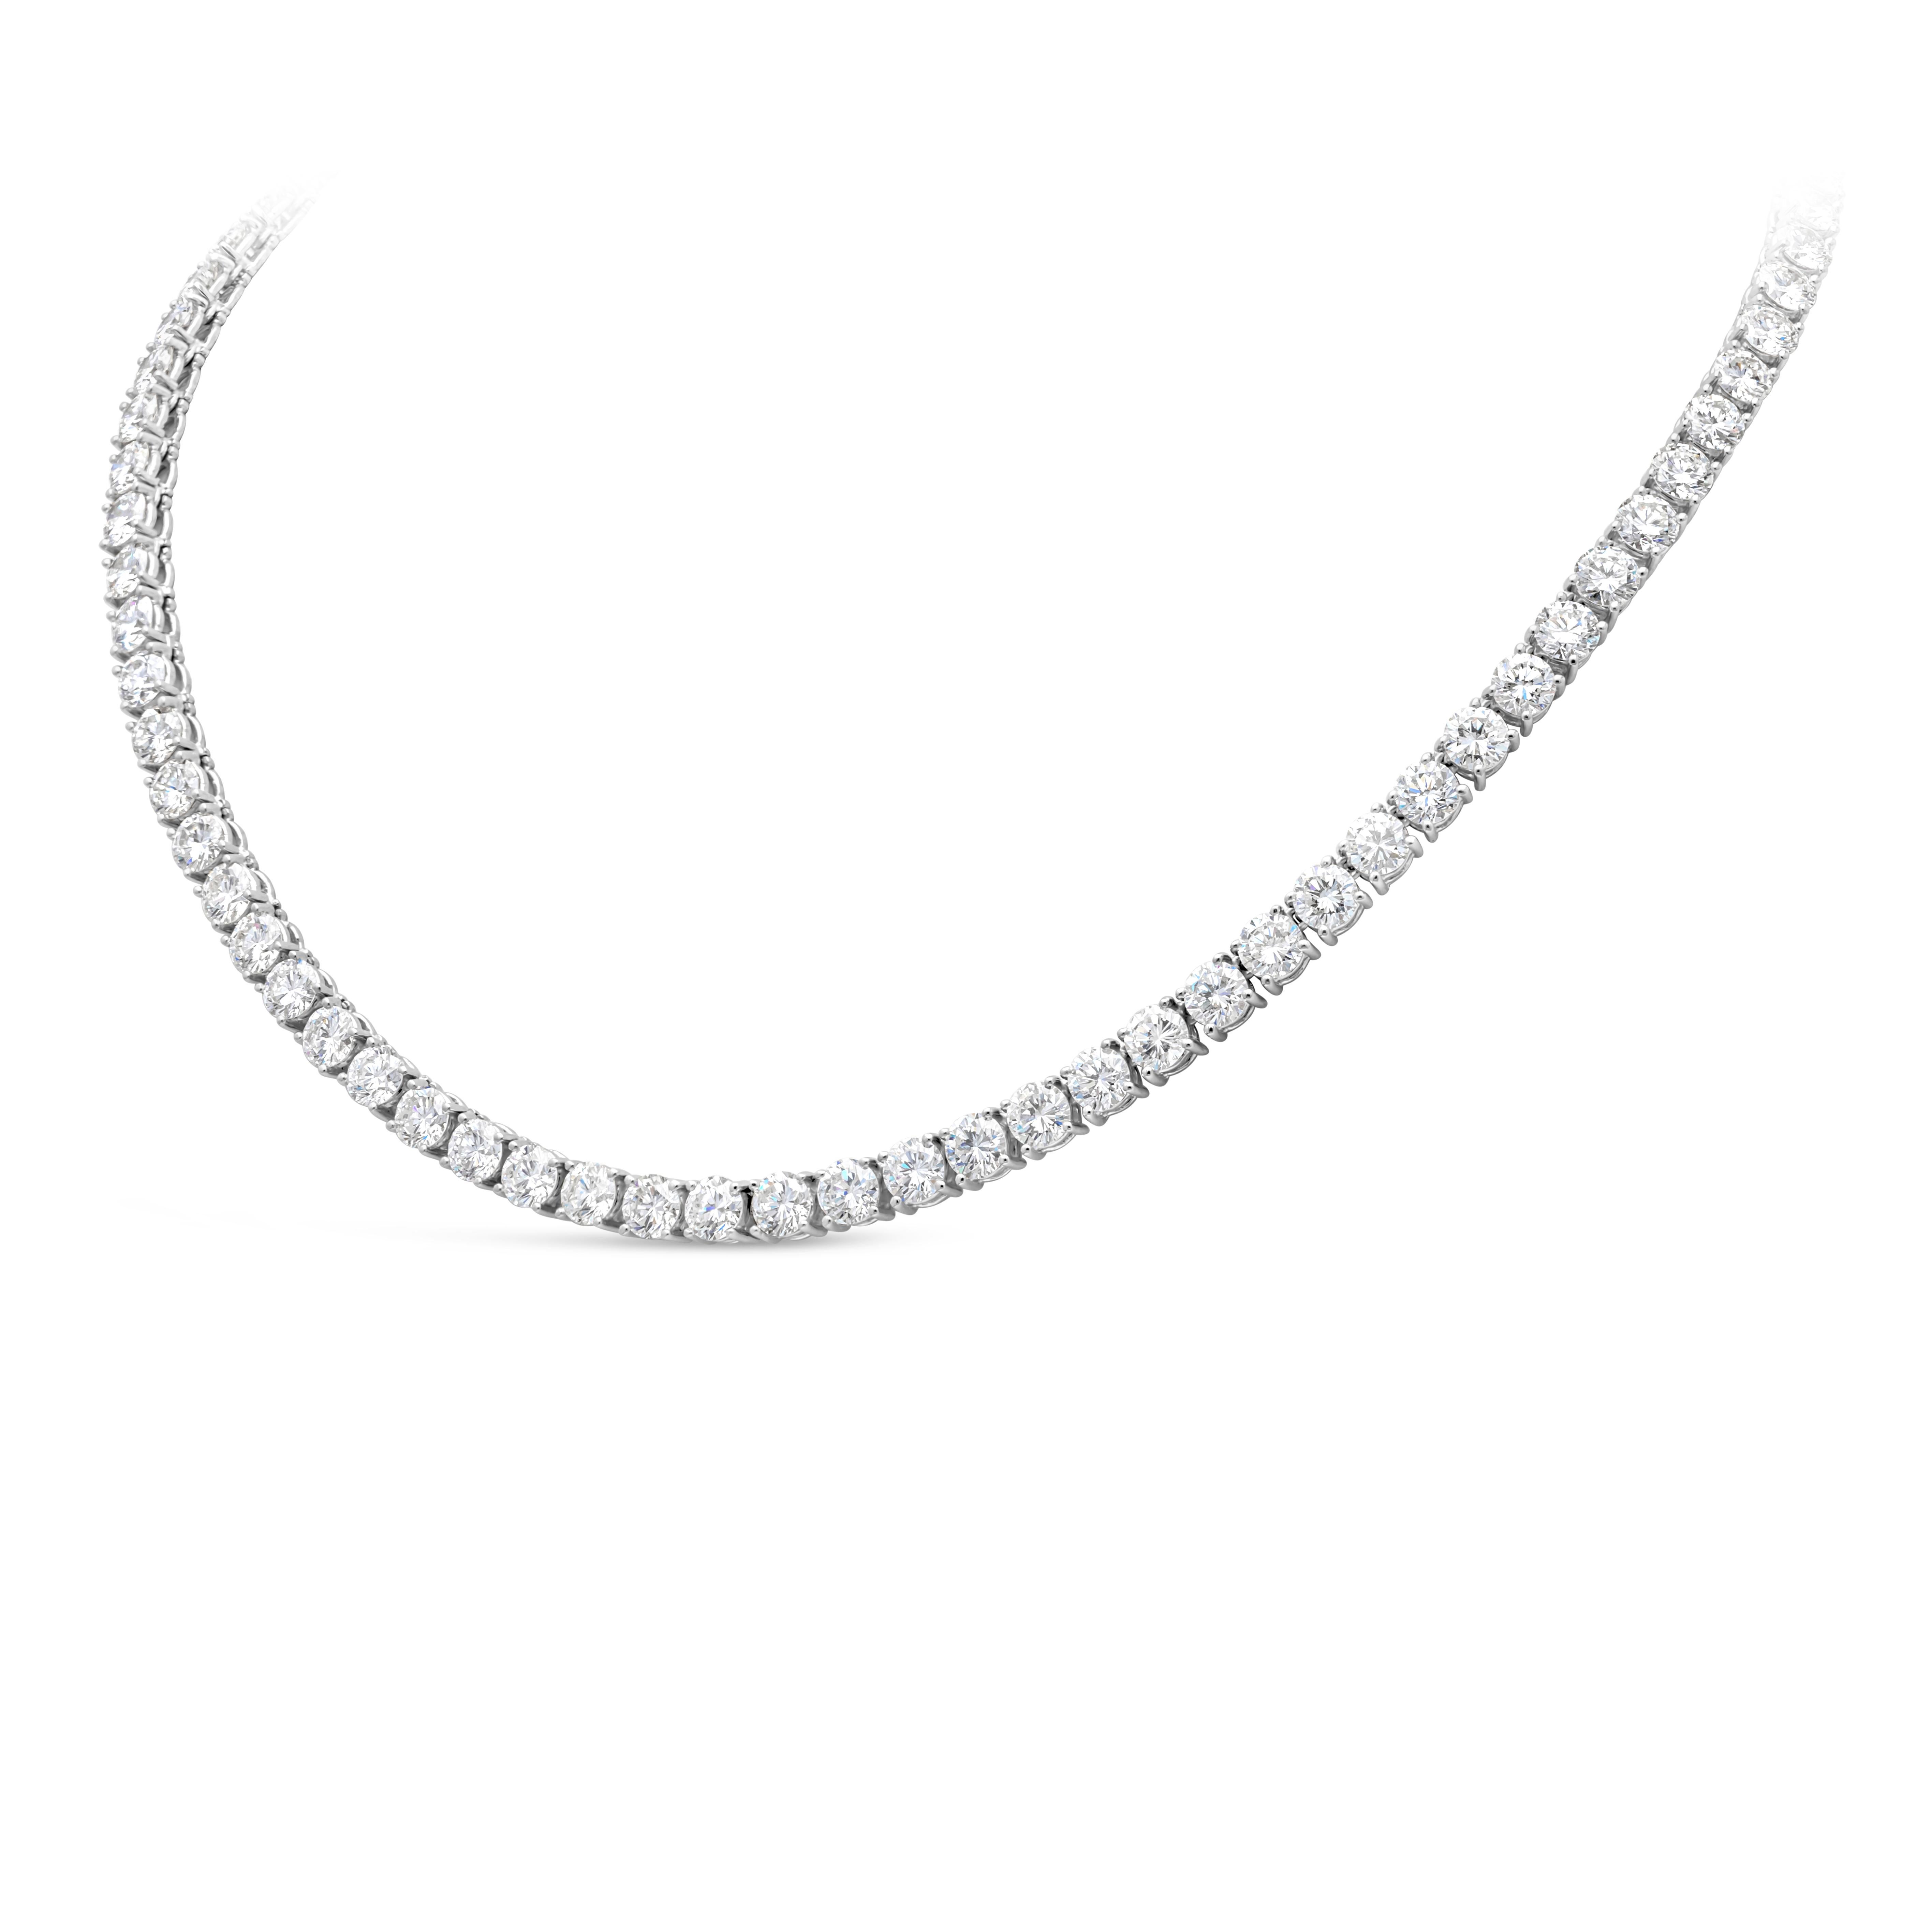 This elegant high end jewelry showcases a line of round brilliant diamonds that graduate slightly larger in size as it goes to the center. Diamonds weigh 22.59 carats total, D-E-F color and VS-VVS in clarity. Finely made in platinum and 14.75 inches